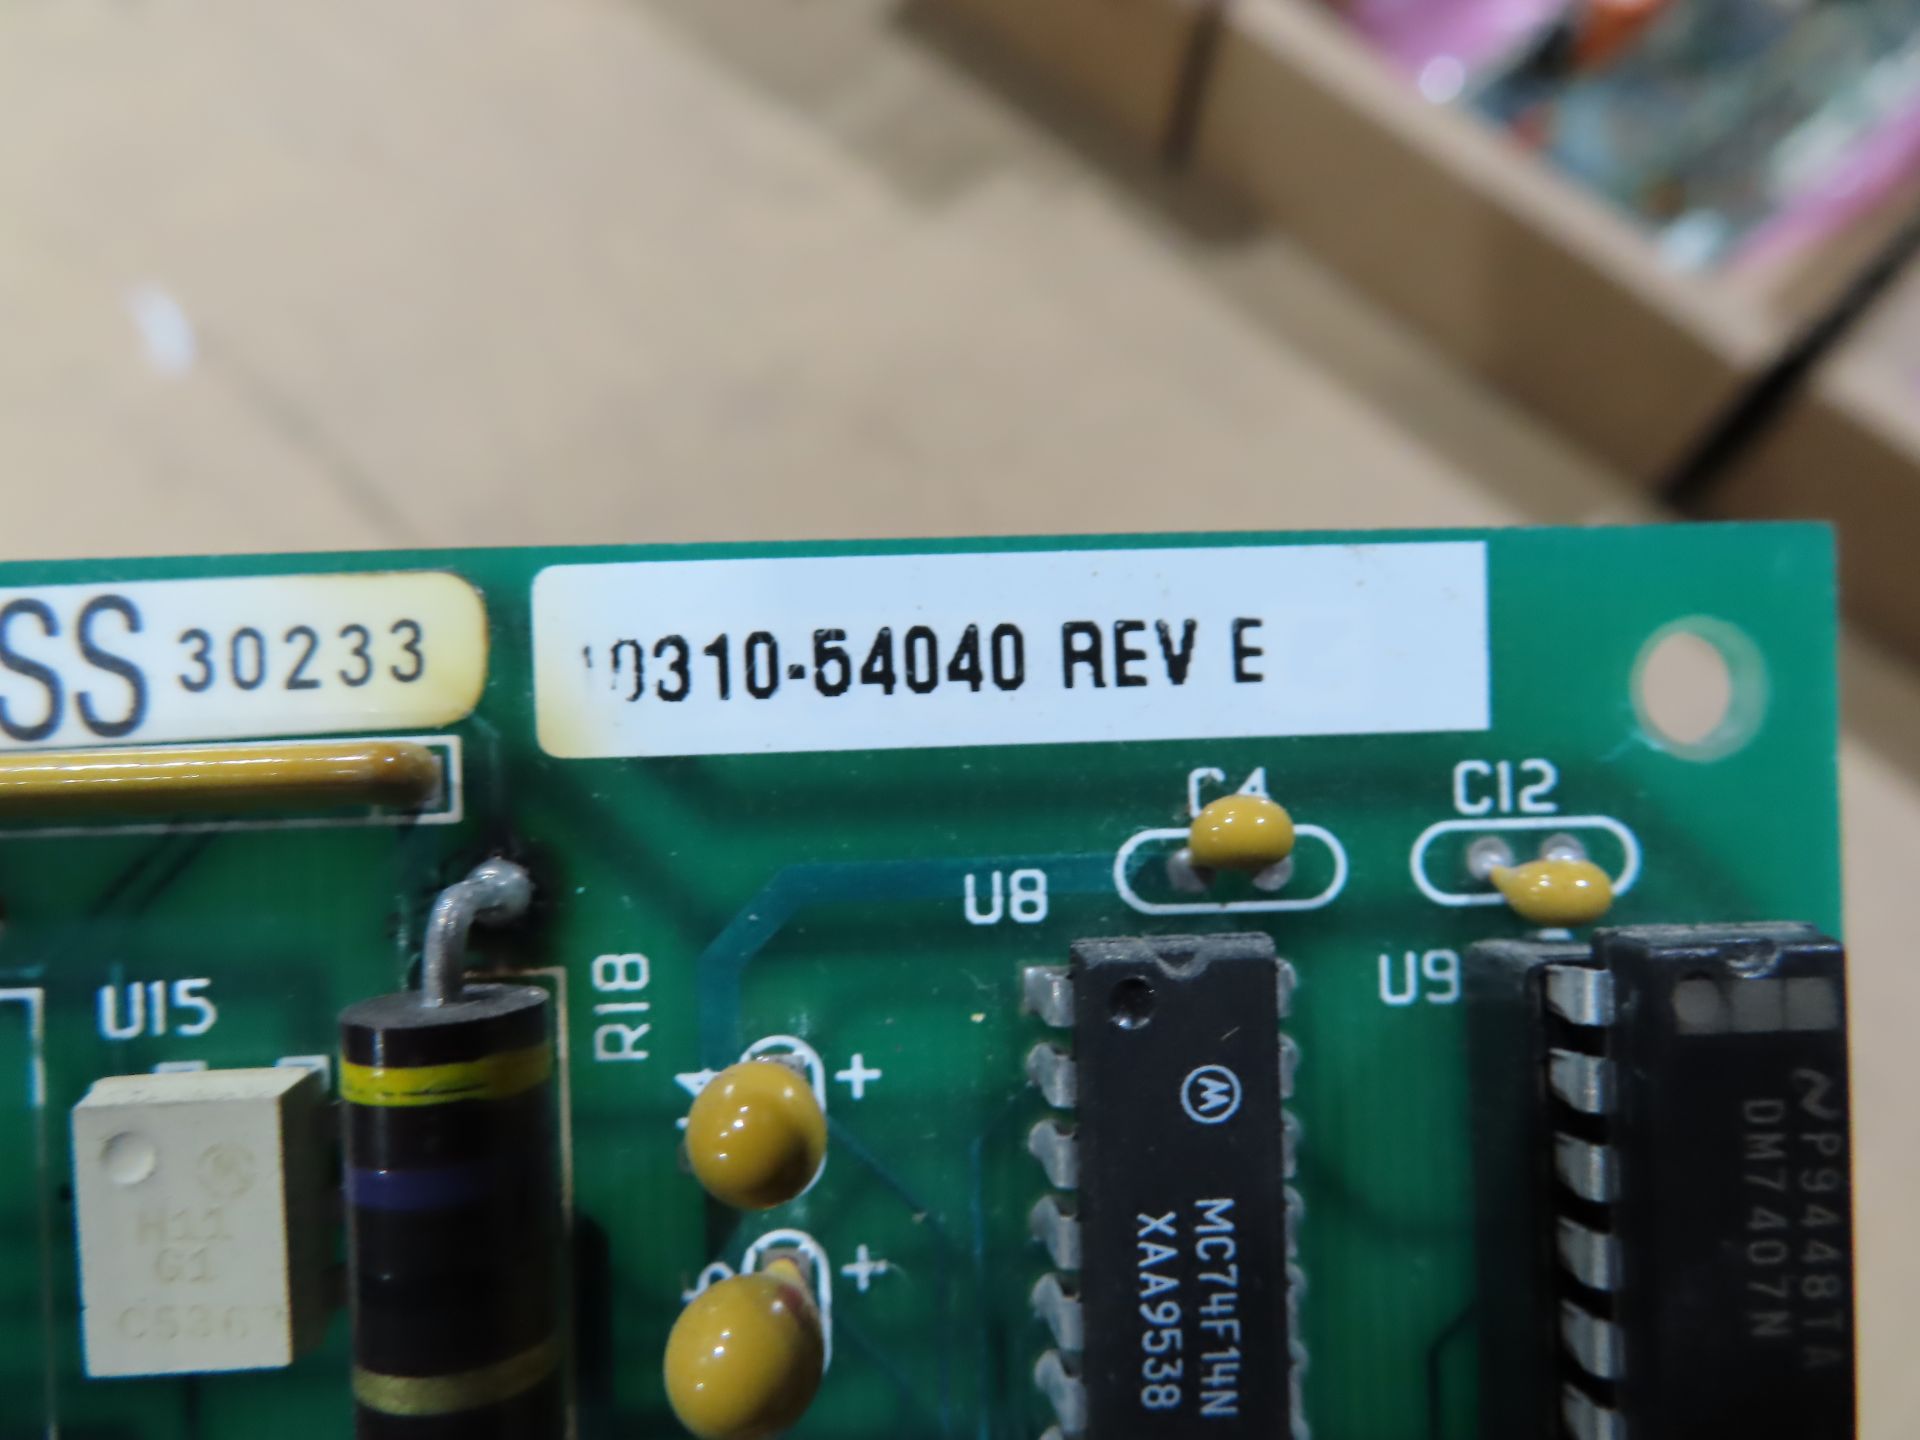 Adept 10310-54040 rev E I/O card, as always, with Brolyn LLC auctions, all lots can be picked up - Image 2 of 2